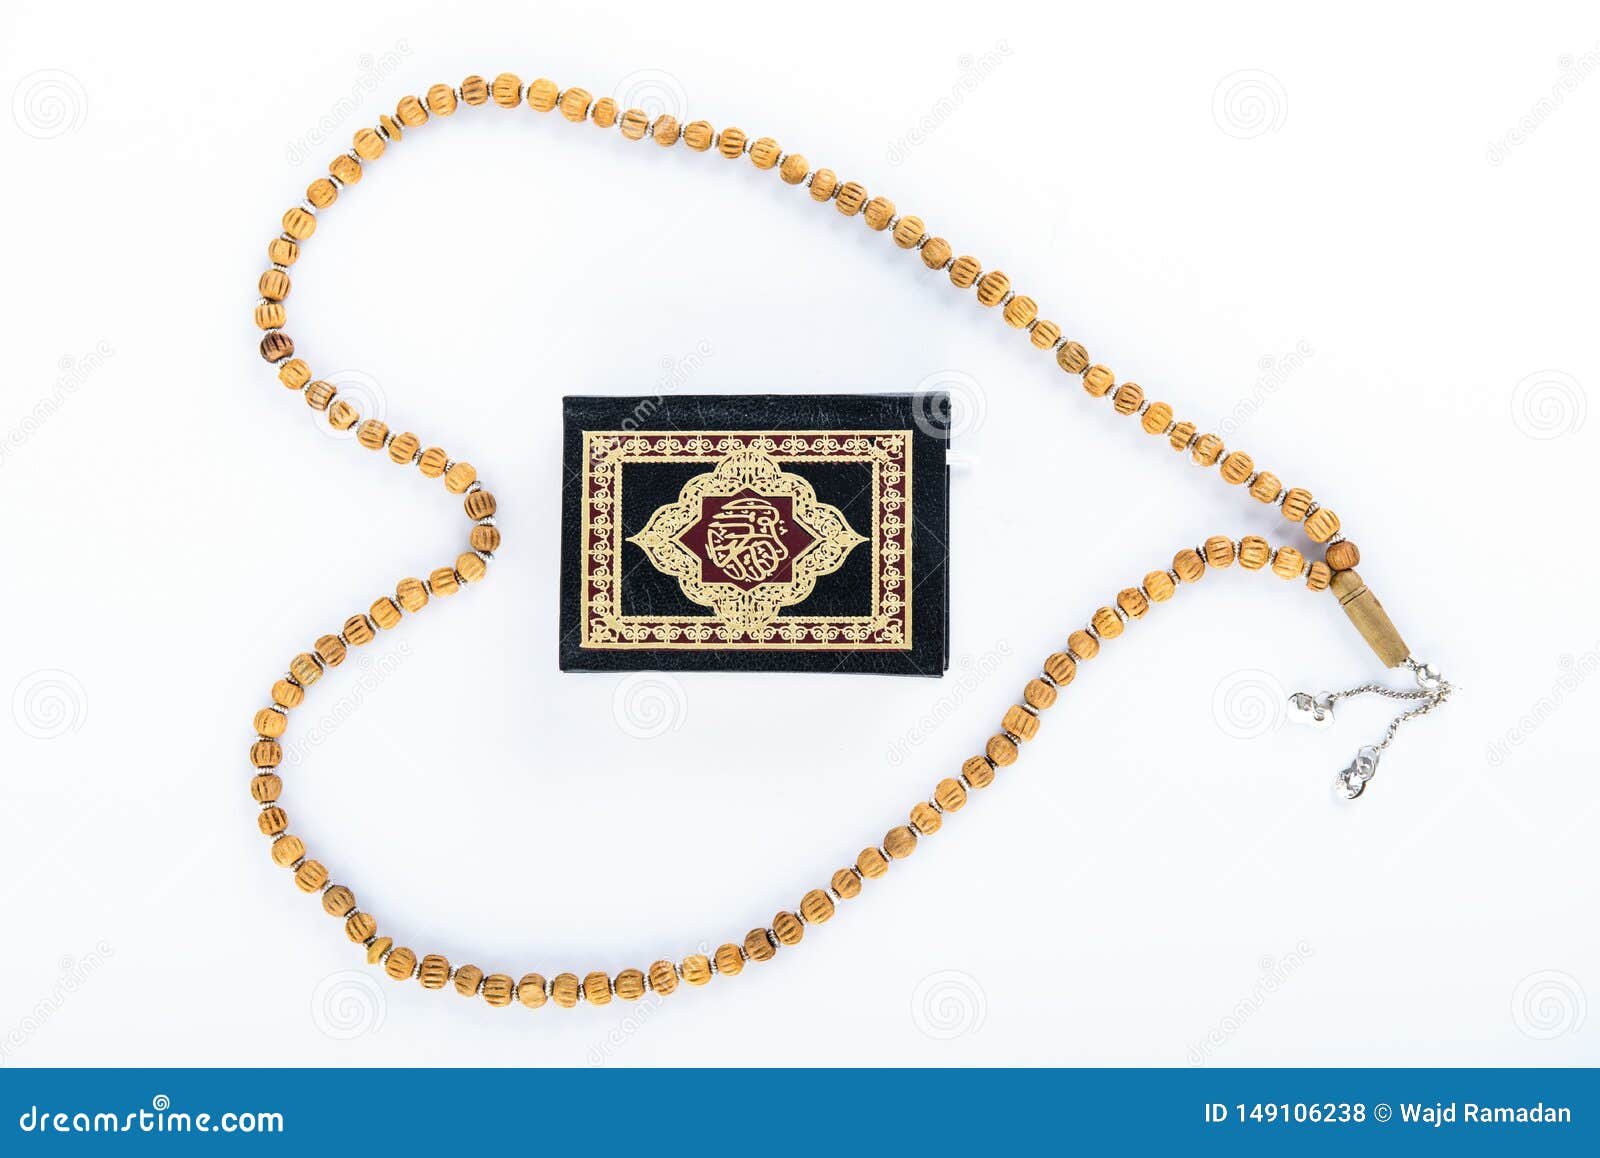 quran with rosary - holy book of muslims - koran - quran white background